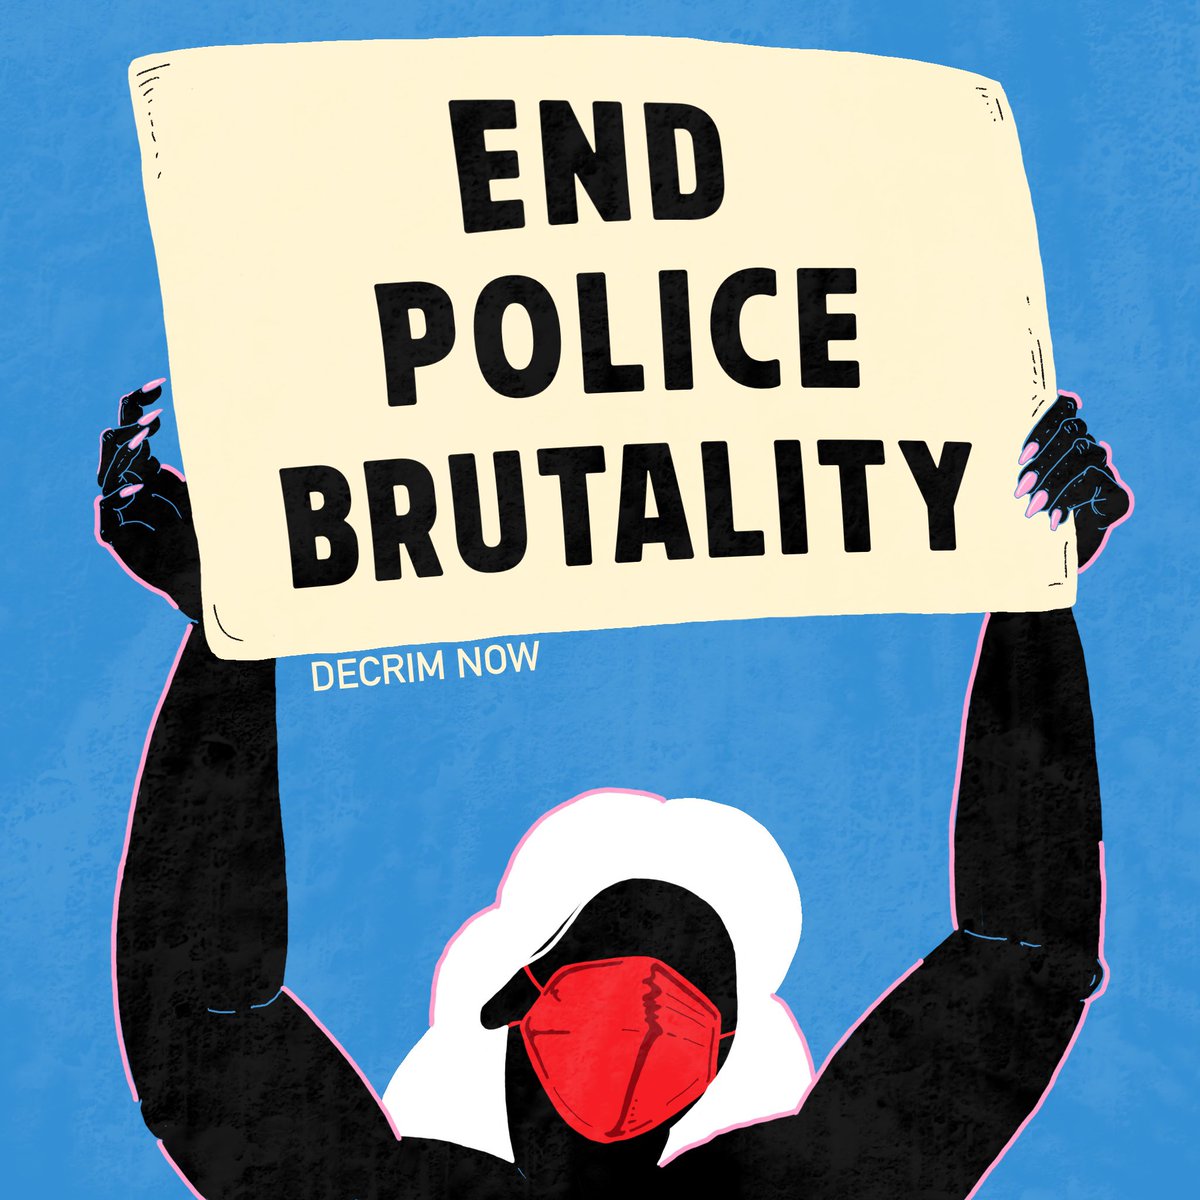 March 15th was International Day Against Police Brutality. The criminalisation of sex work creates conditions where police are often the perpetrators of violence against sex workers. The police do not keep sex workers safe. We need full decriminalisation now. (1/12)